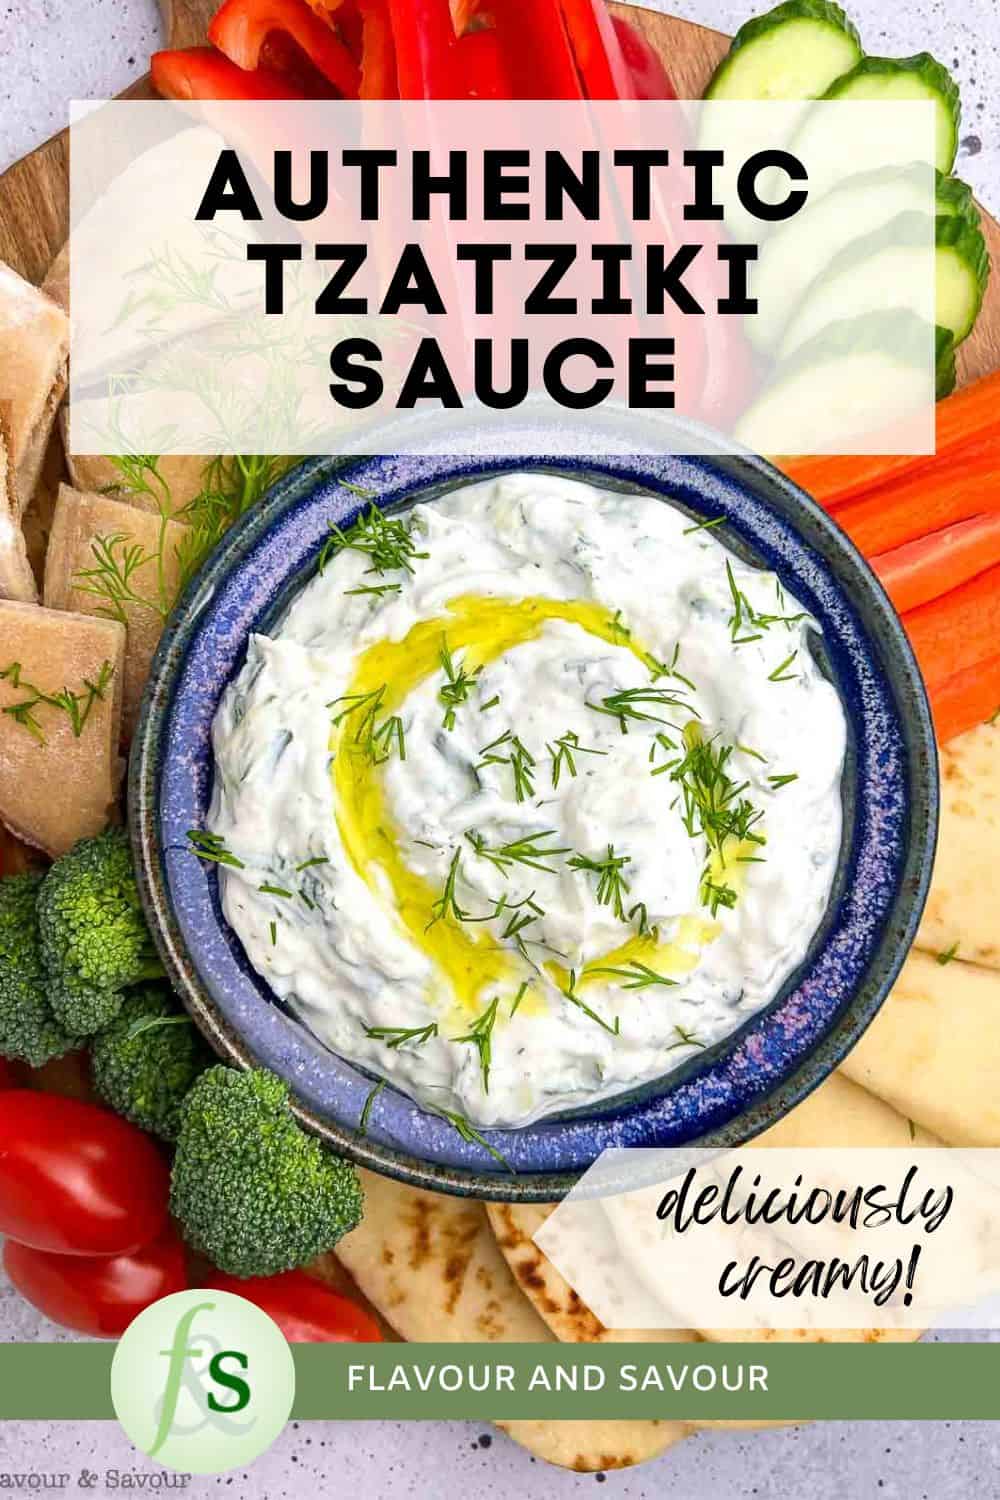 Image with text overlay for how to make tzatziki sauce.